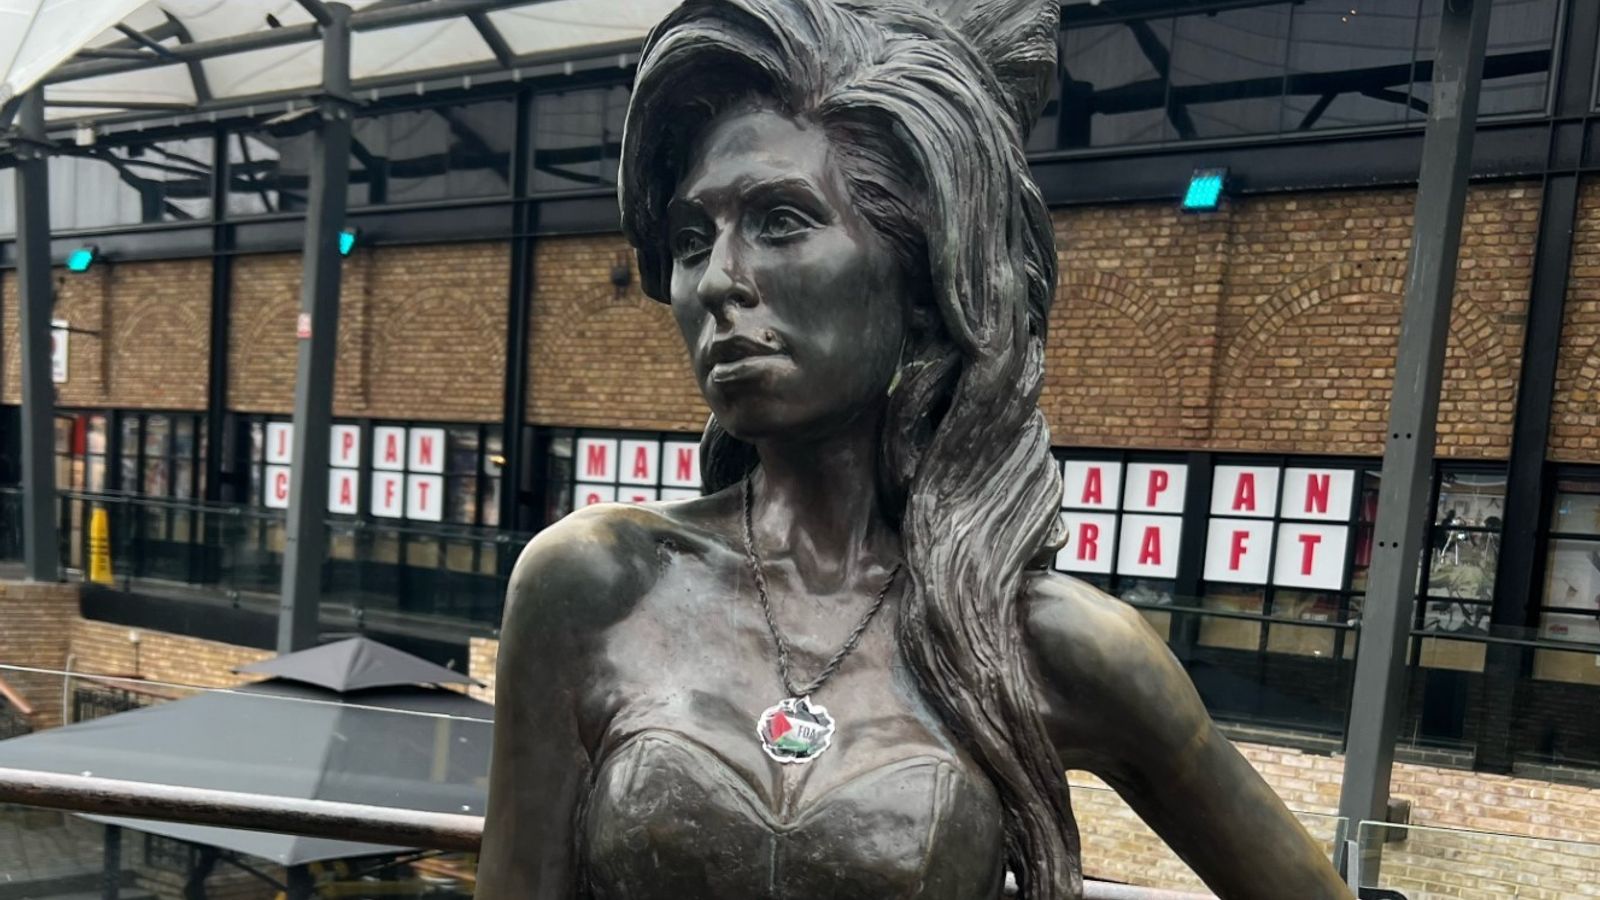 Amy Winehouse: Star of David necklace on singer's Camden statue covered by pro-Palestinian sticker